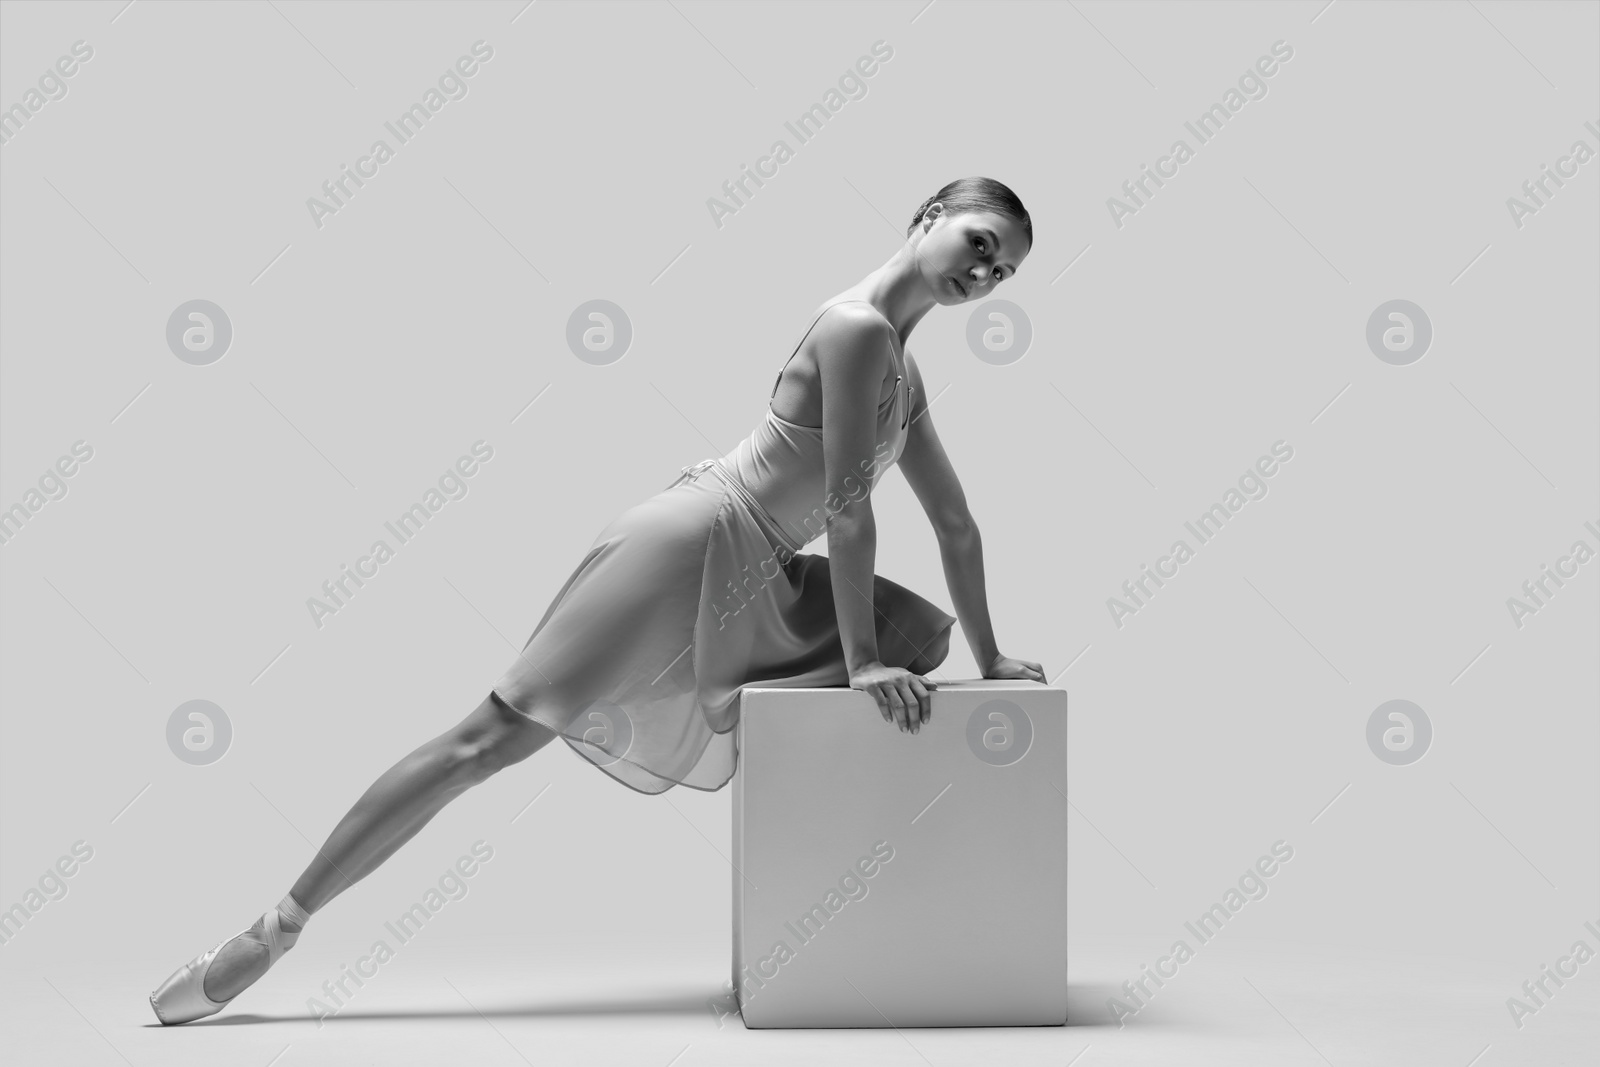 Photo of Young ballerina practicing dance moves on cube, toned in black and white